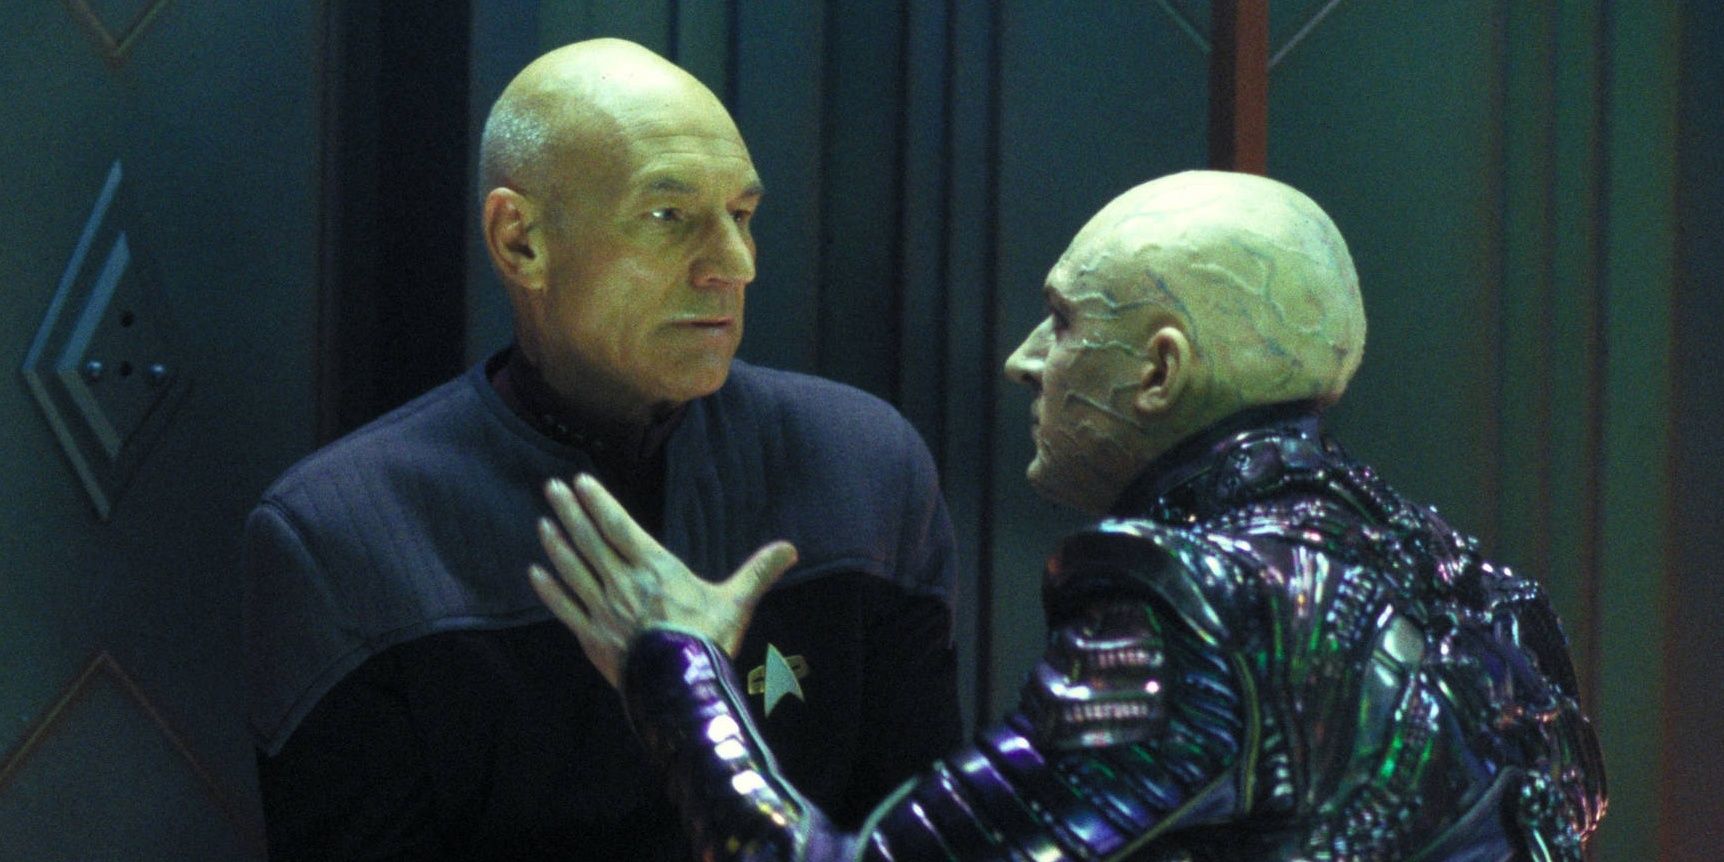 A lively discussion between Picard and Shinzon